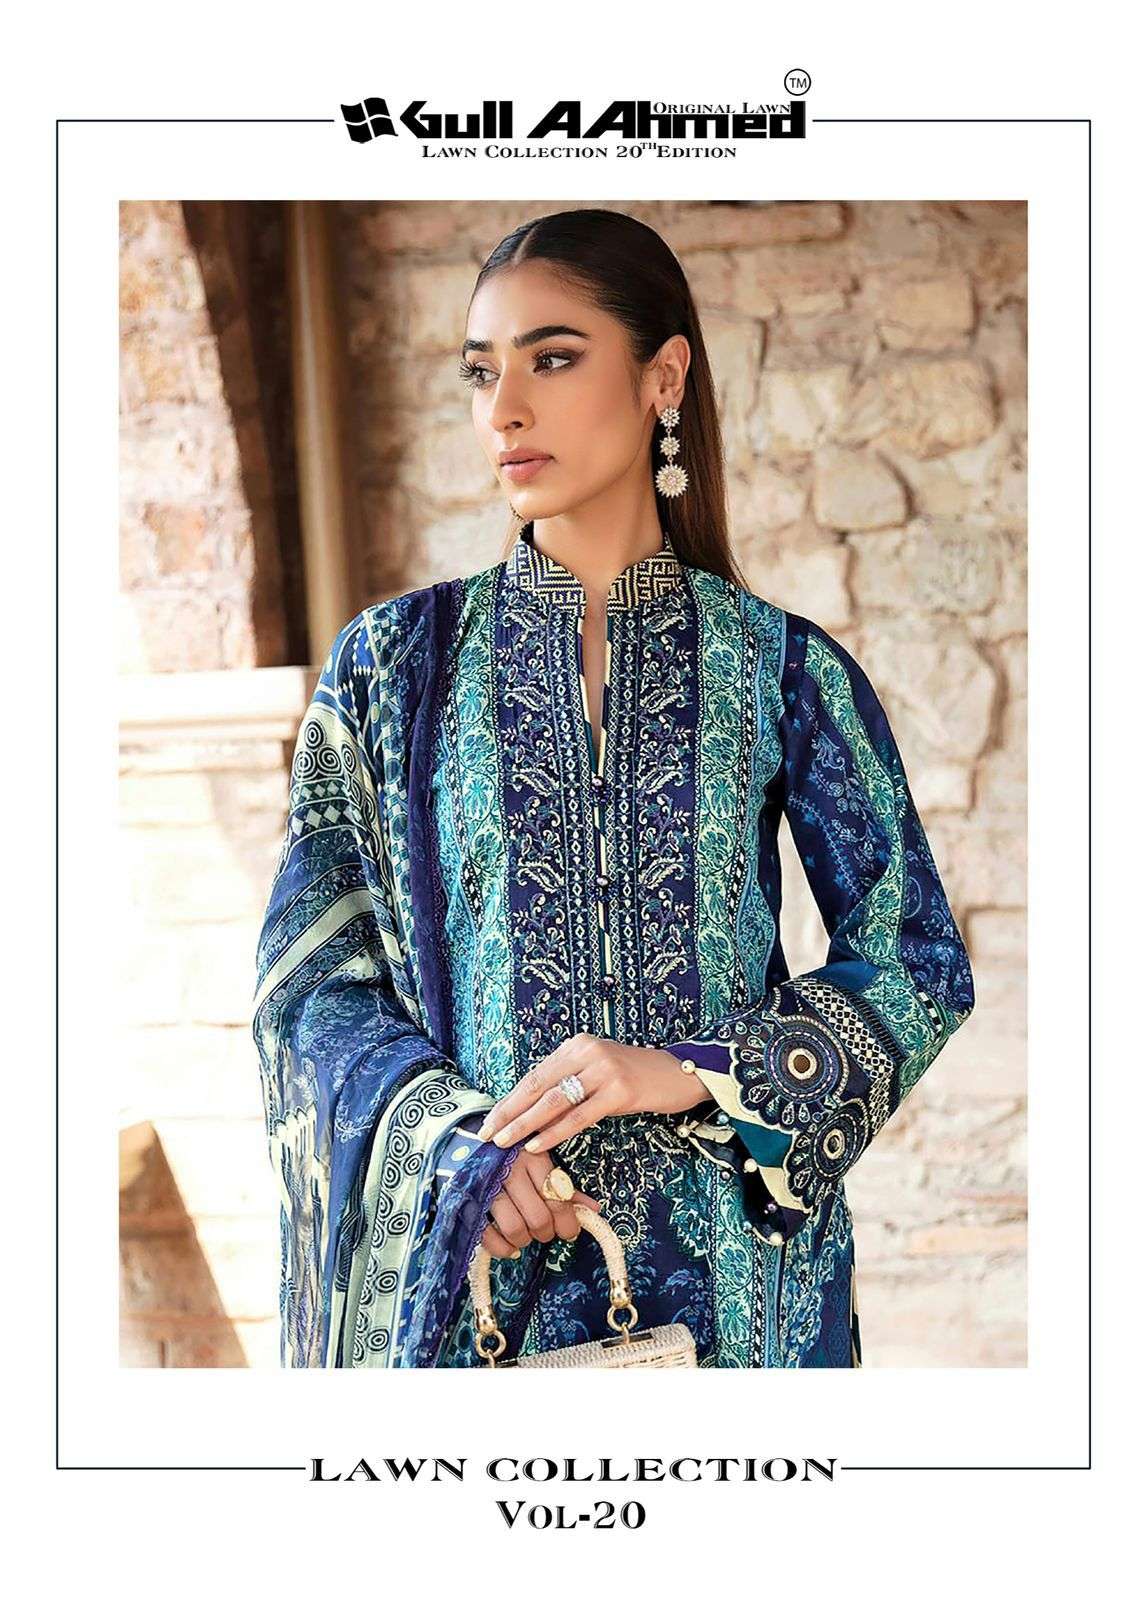 GULL AAHMED LAWN COLLECTION VOL 20